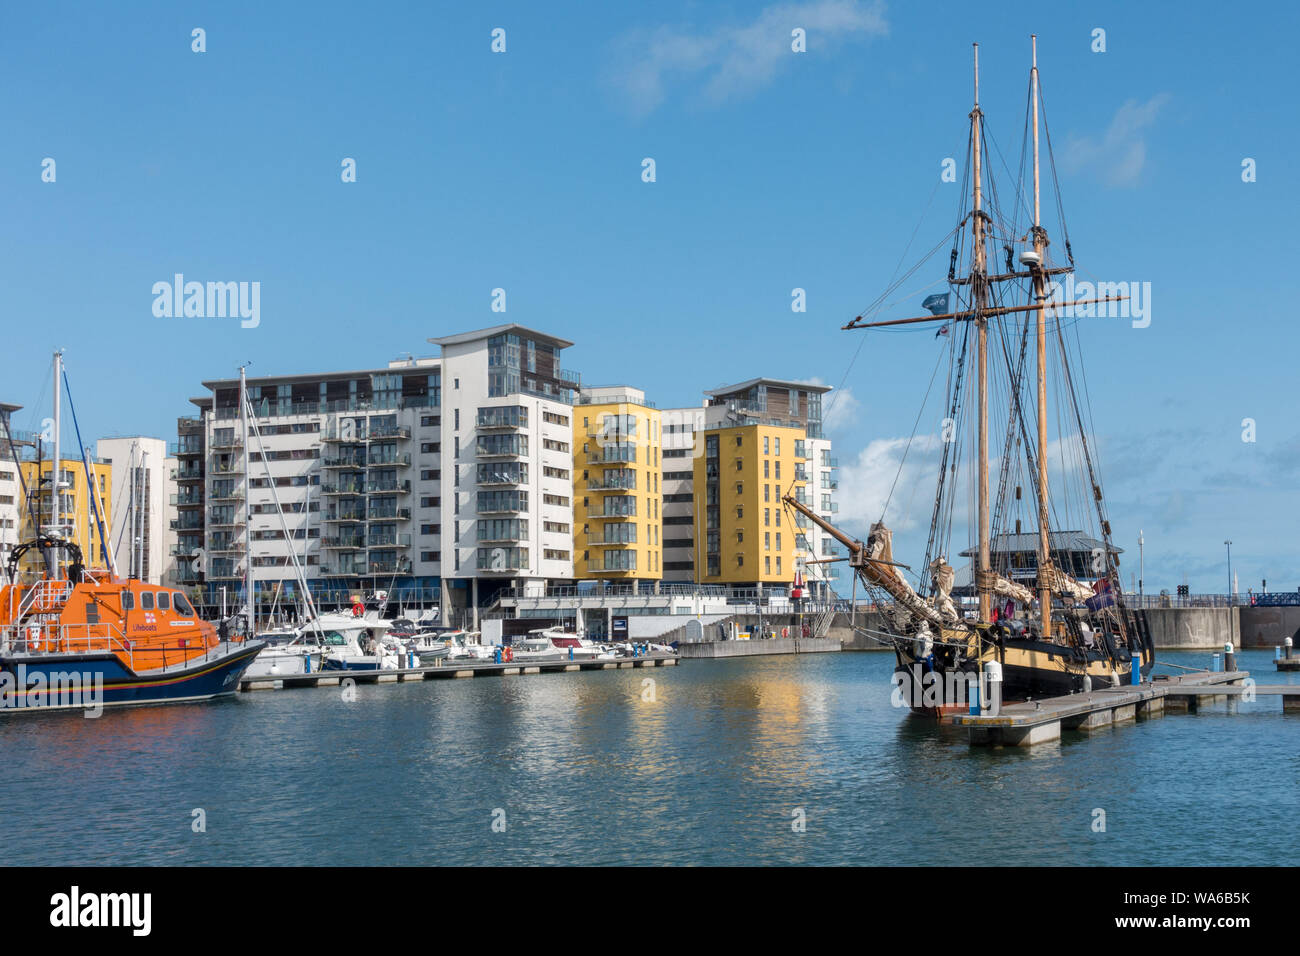 The old and the new; A tallship moored in Sovereign Harbour, Eastbourne, East Sussex, England, UK Stock Photo